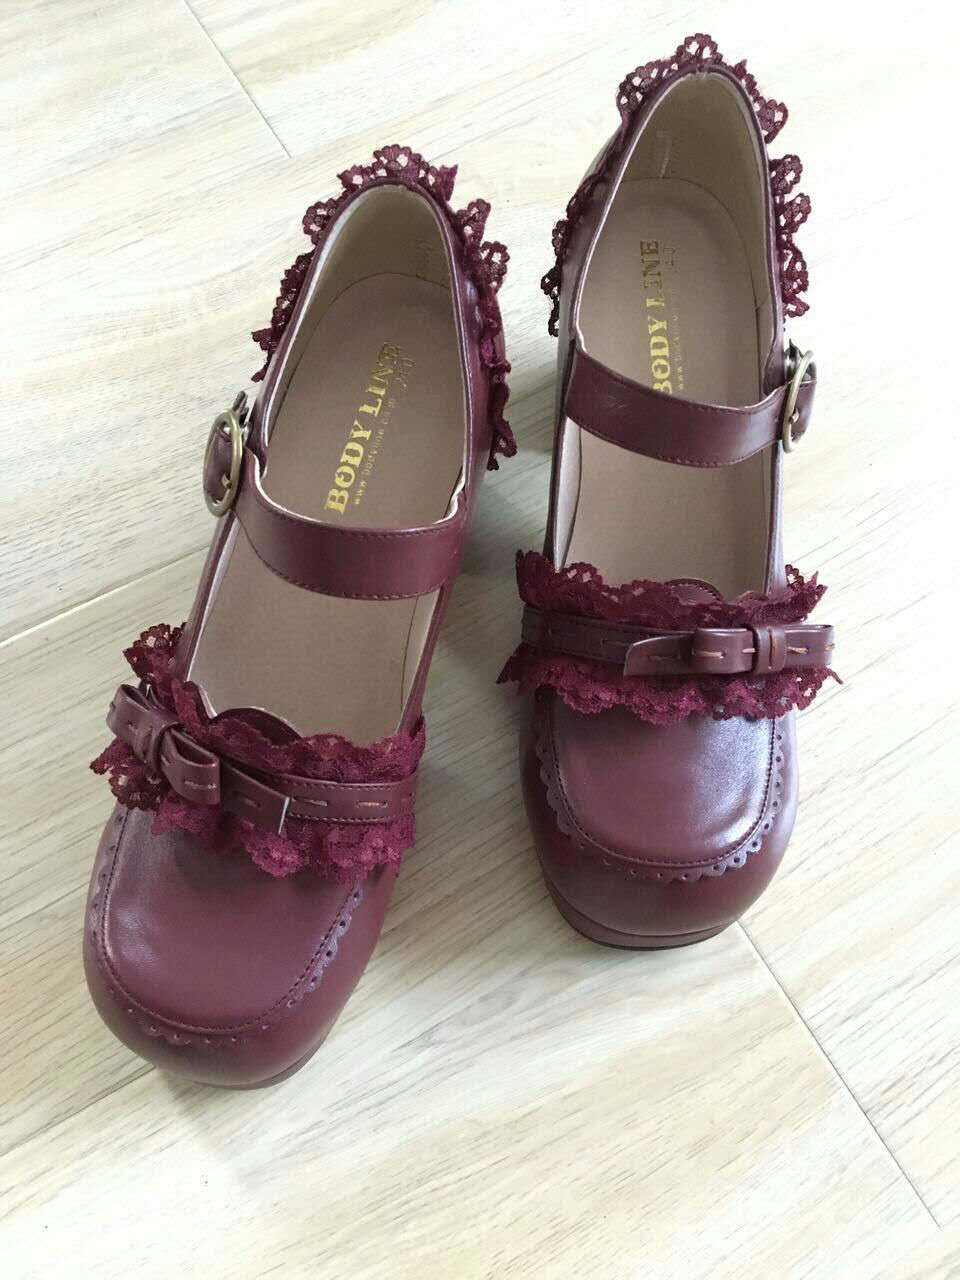 (BuyForMe) The Seventh Sense~Bow Lace Customized Lolita Shoes 34 wine red 